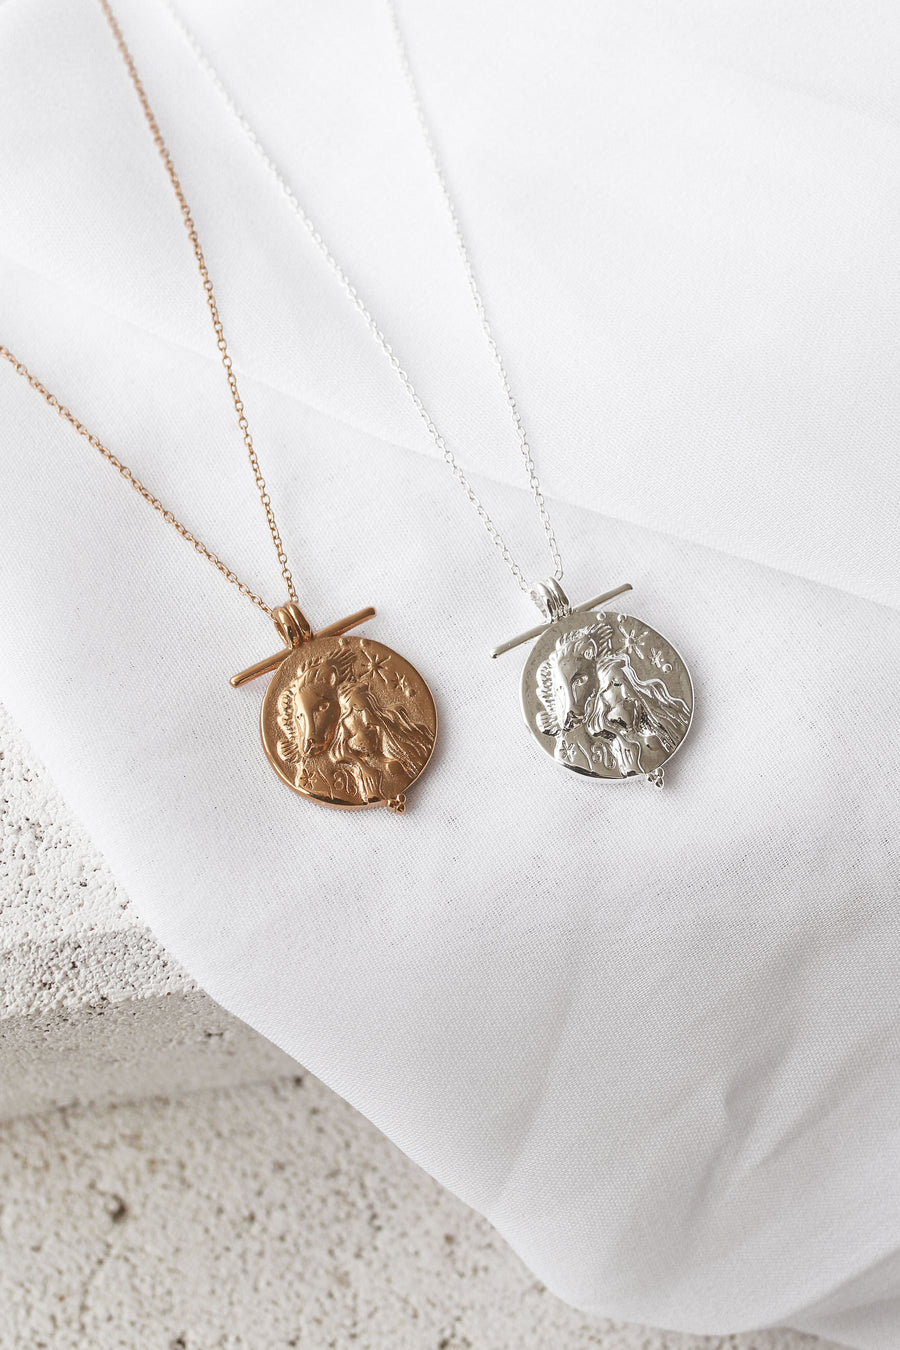 Zyla - 14ct Gold or Silver Plated Zodiac Necklace